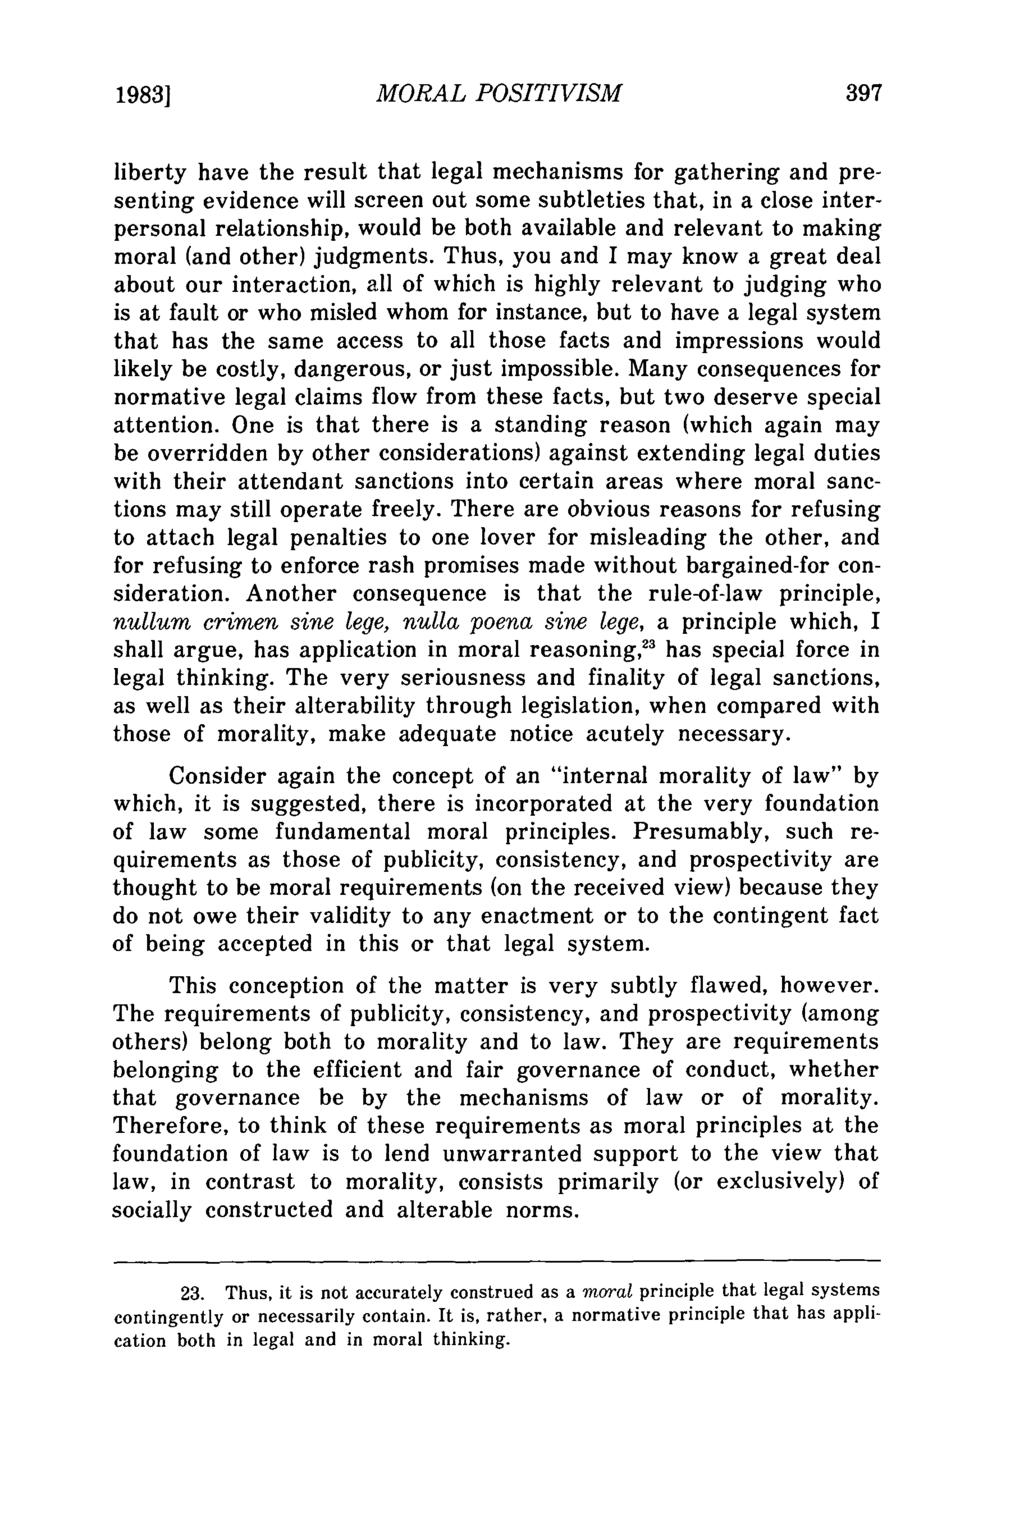 19831 Johnson: Moral Positivism and the Internal Legality of Morals MORAL POSITIVISM liberty have the result that legal mechanisms for gathering and presenting evidence will screen out some